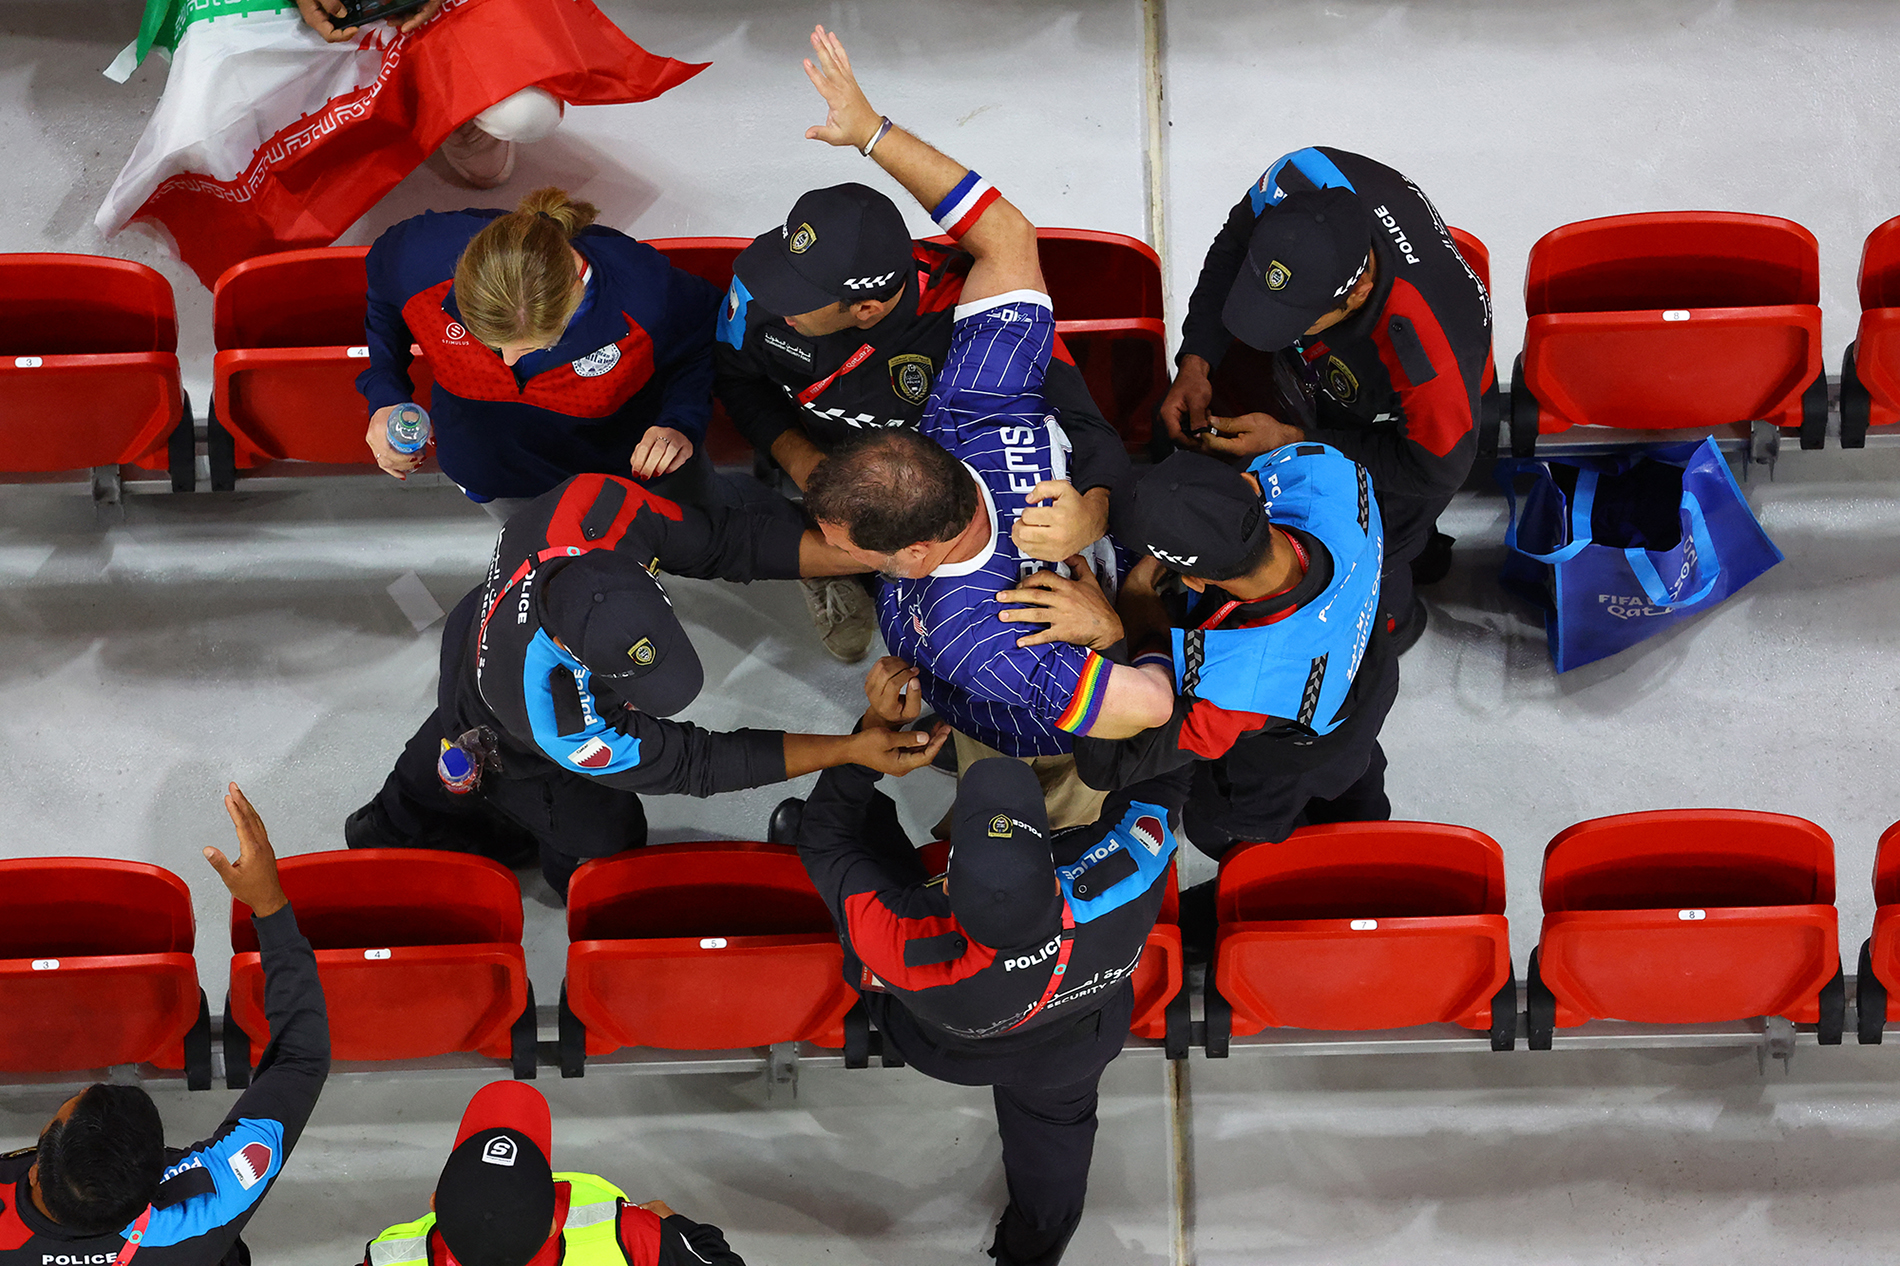  A fan wearing a rainbow coloured arm band is removed from the stands by police officers at a FIFA World Cup game on November 29, 2022